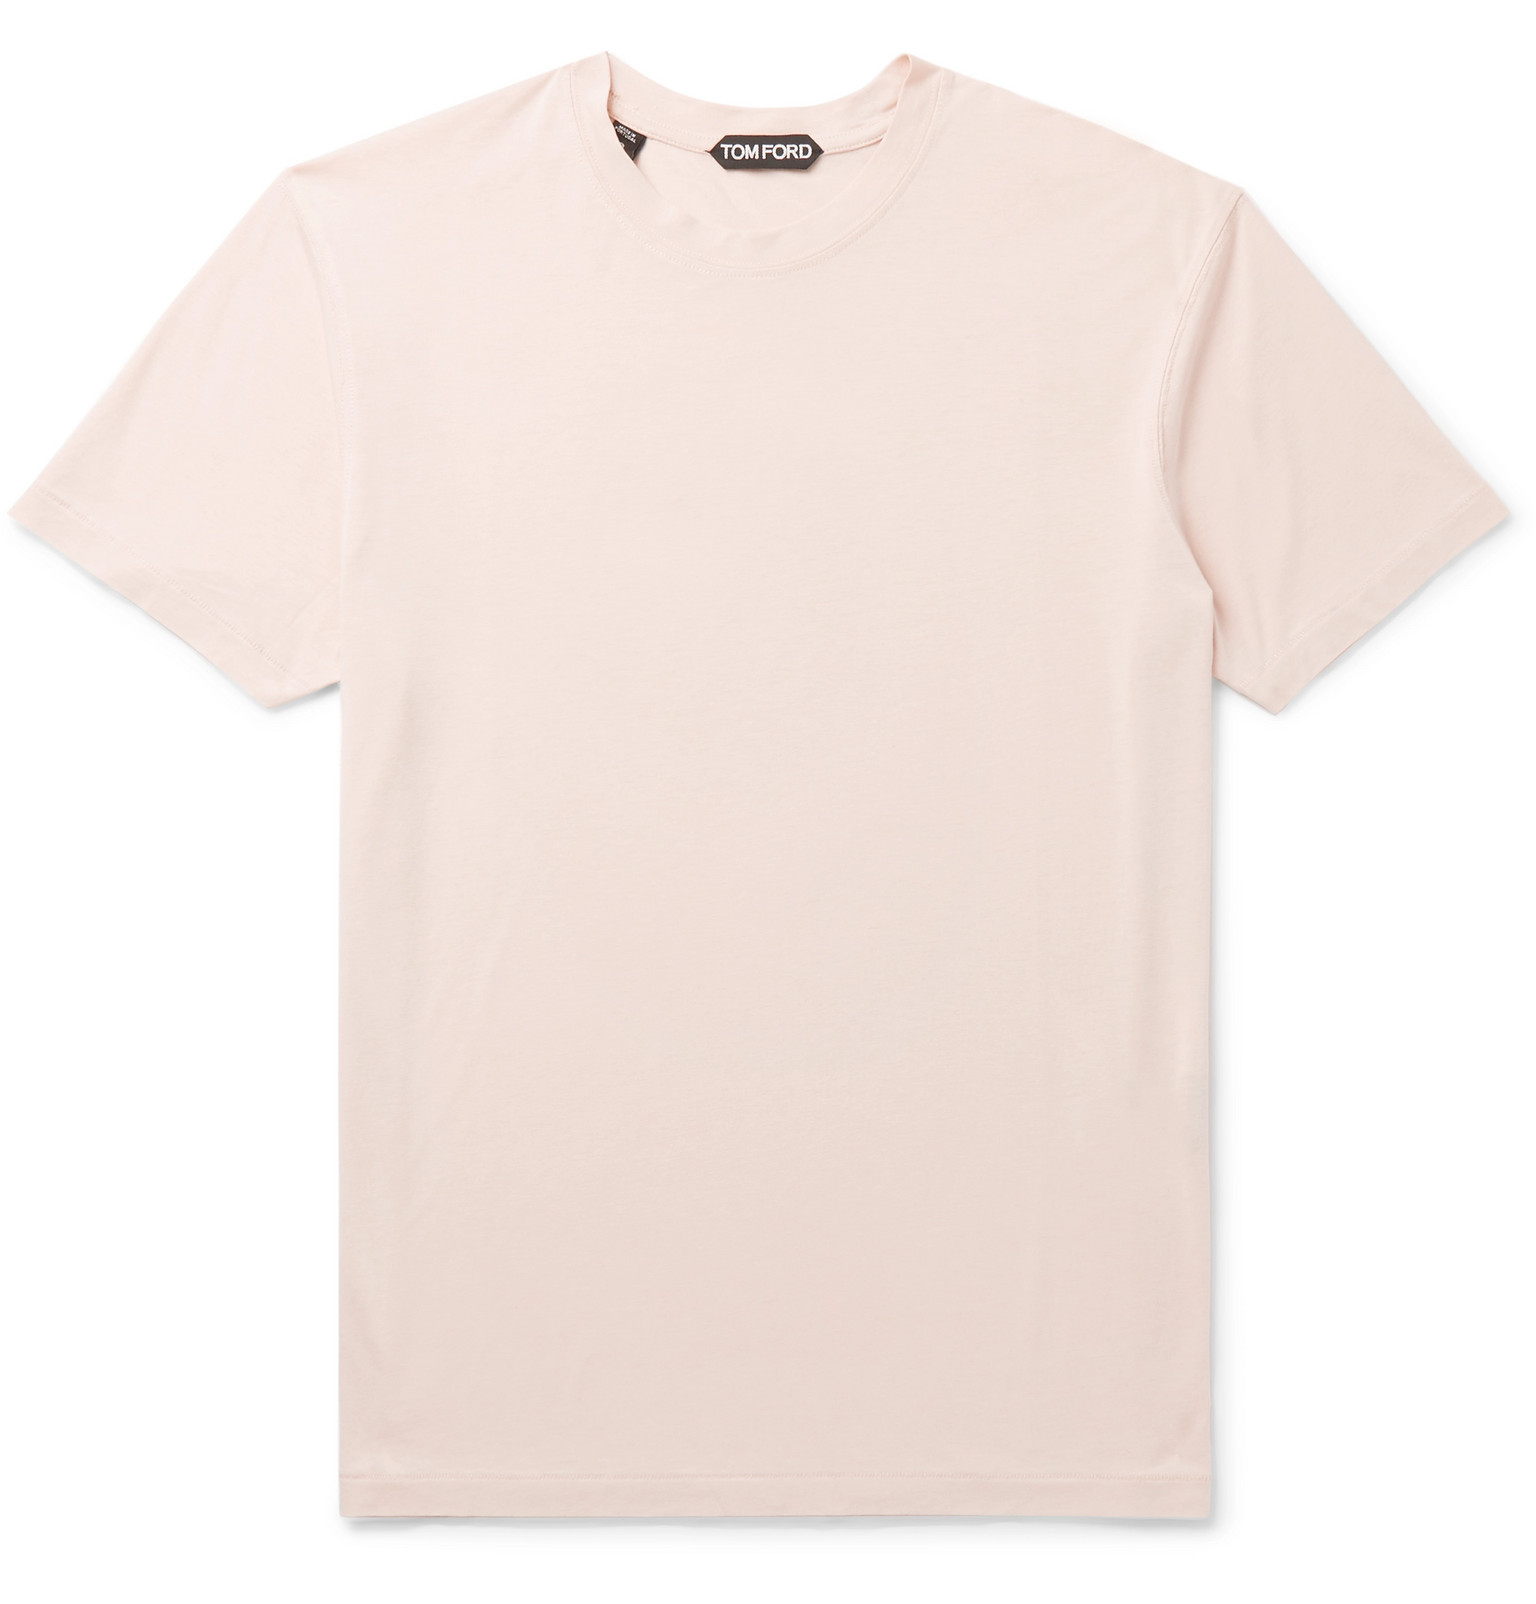 TOM FORD - Slim-Fit Lyocell and Cotton-Blend Jersey T-Shirt - Men ...